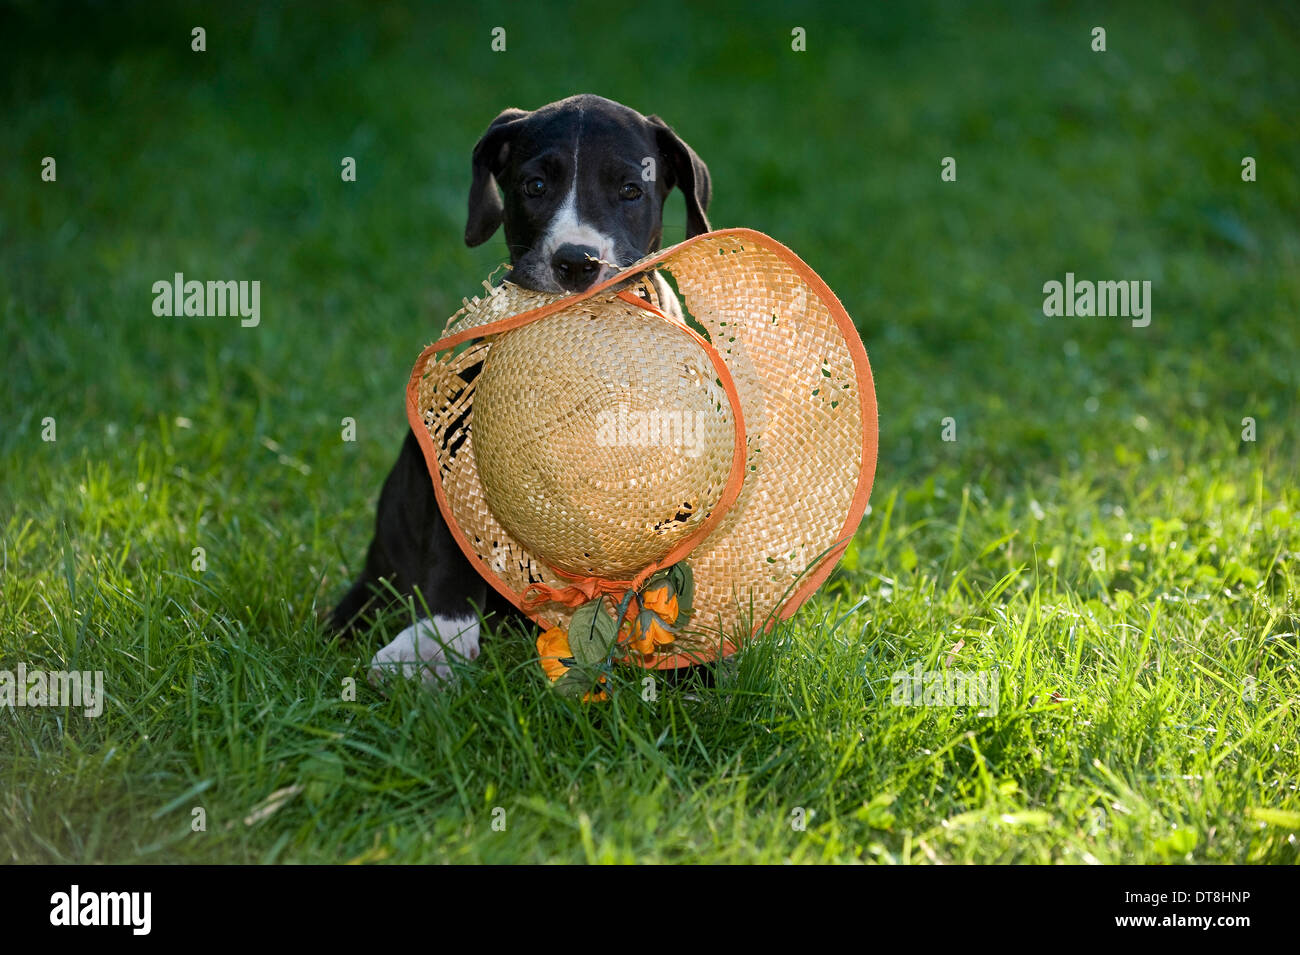 Great Dane Black puppy with white patches (6 weeks old) playing with a straw hat Stock Photo